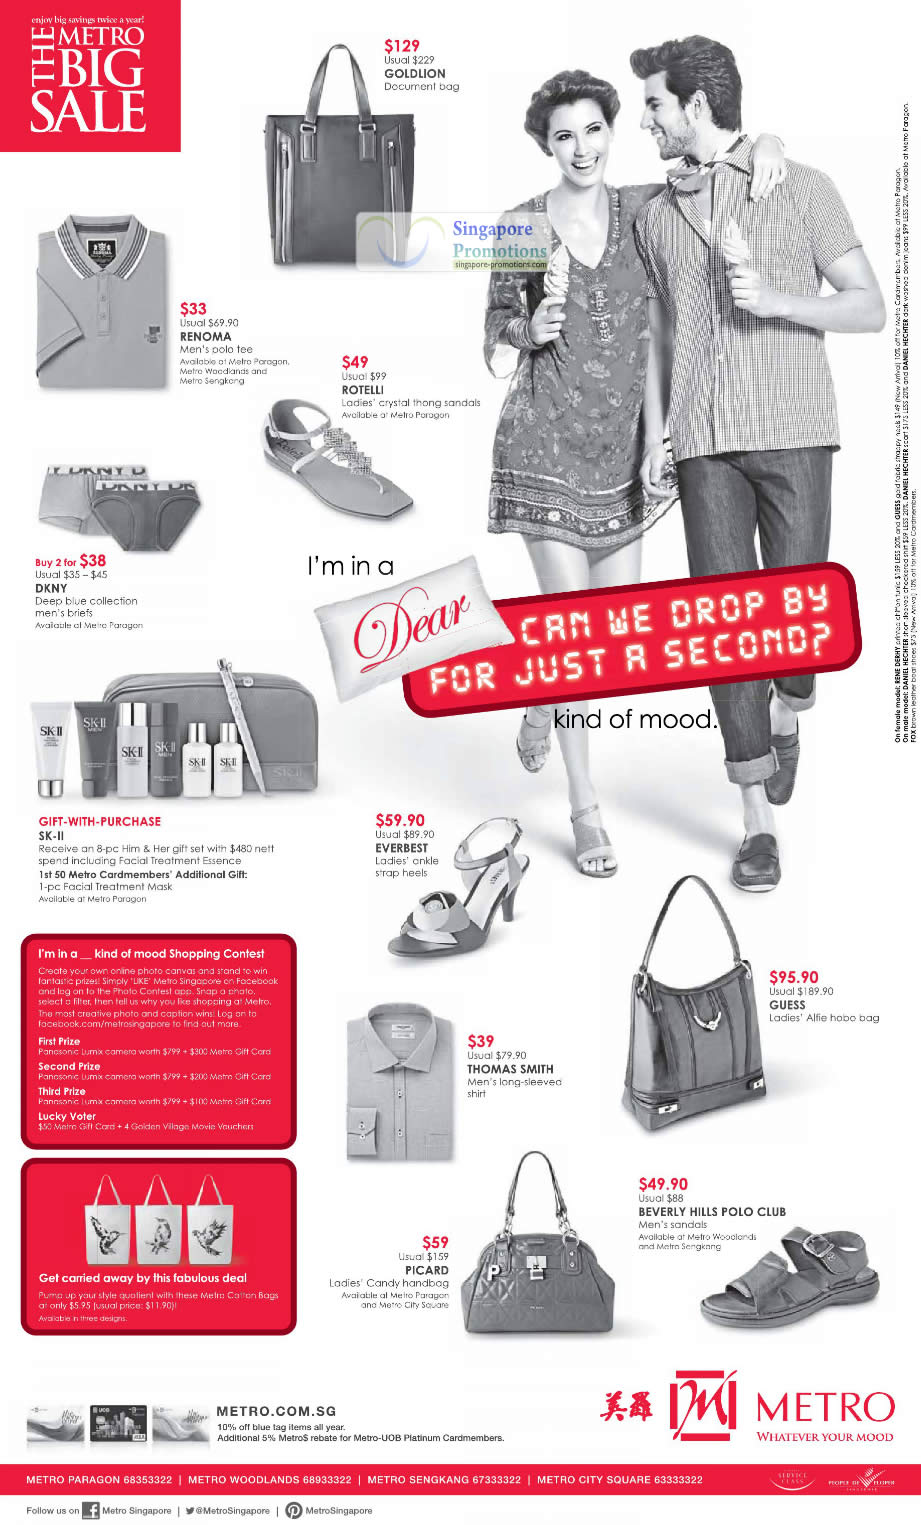 Featured image for Metro The Big Sale Promotion 17 Aug - 9 Sep 2012